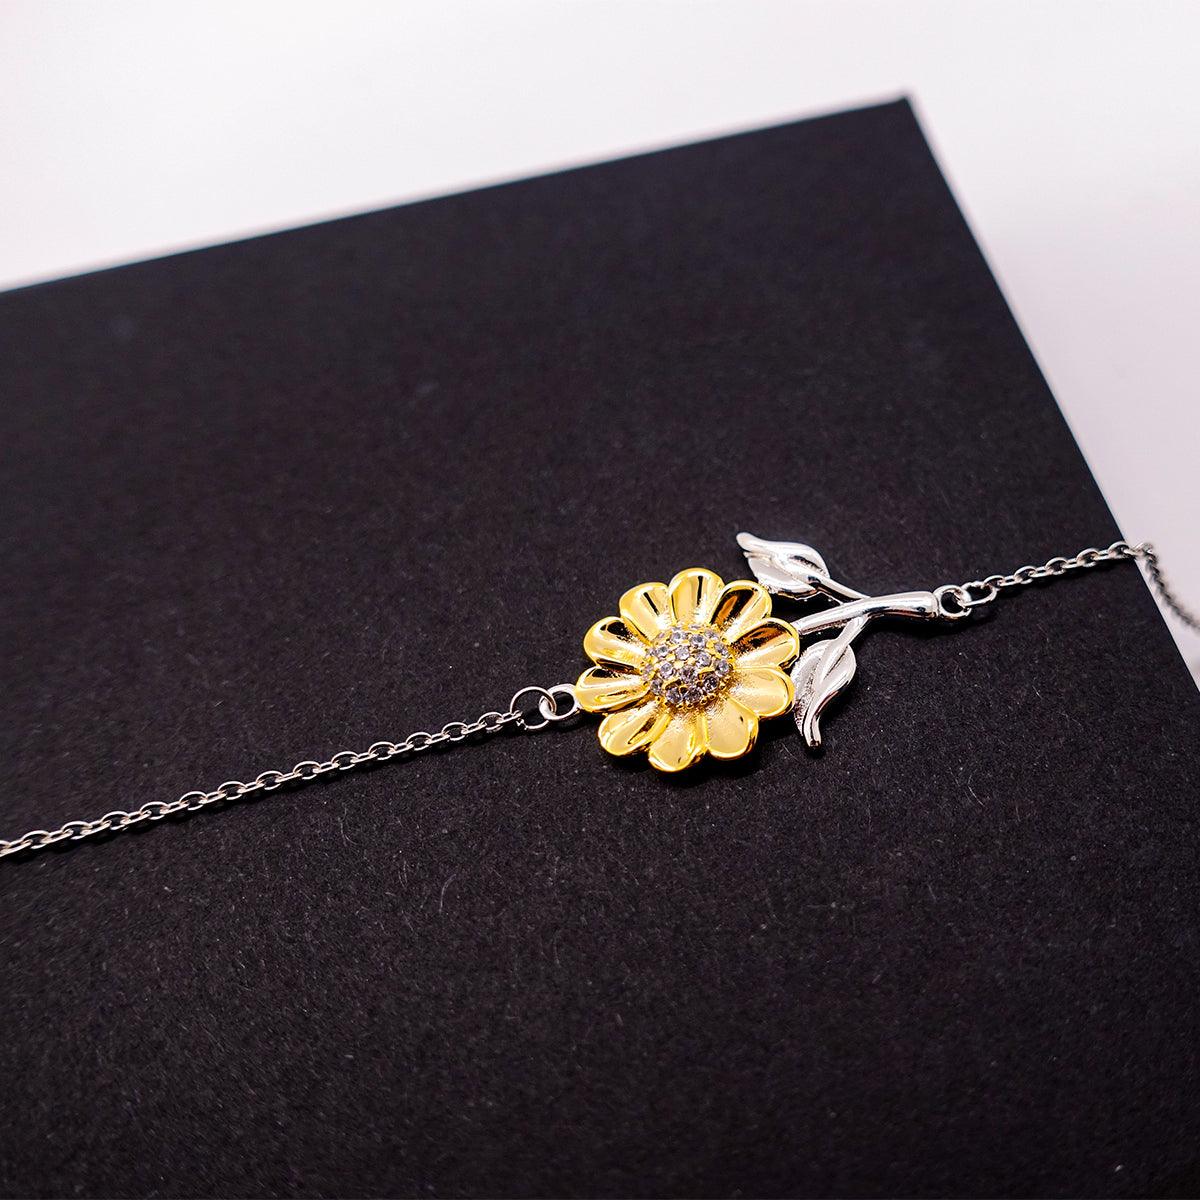 Remarkable Childcare Worker Gifts, Your dedication and hard work, Inspirational Birthday Christmas Unique Sunflower Bracelet For Childcare Worker, Coworkers, Men, Women, Friends - Mallard Moon Gift Shop